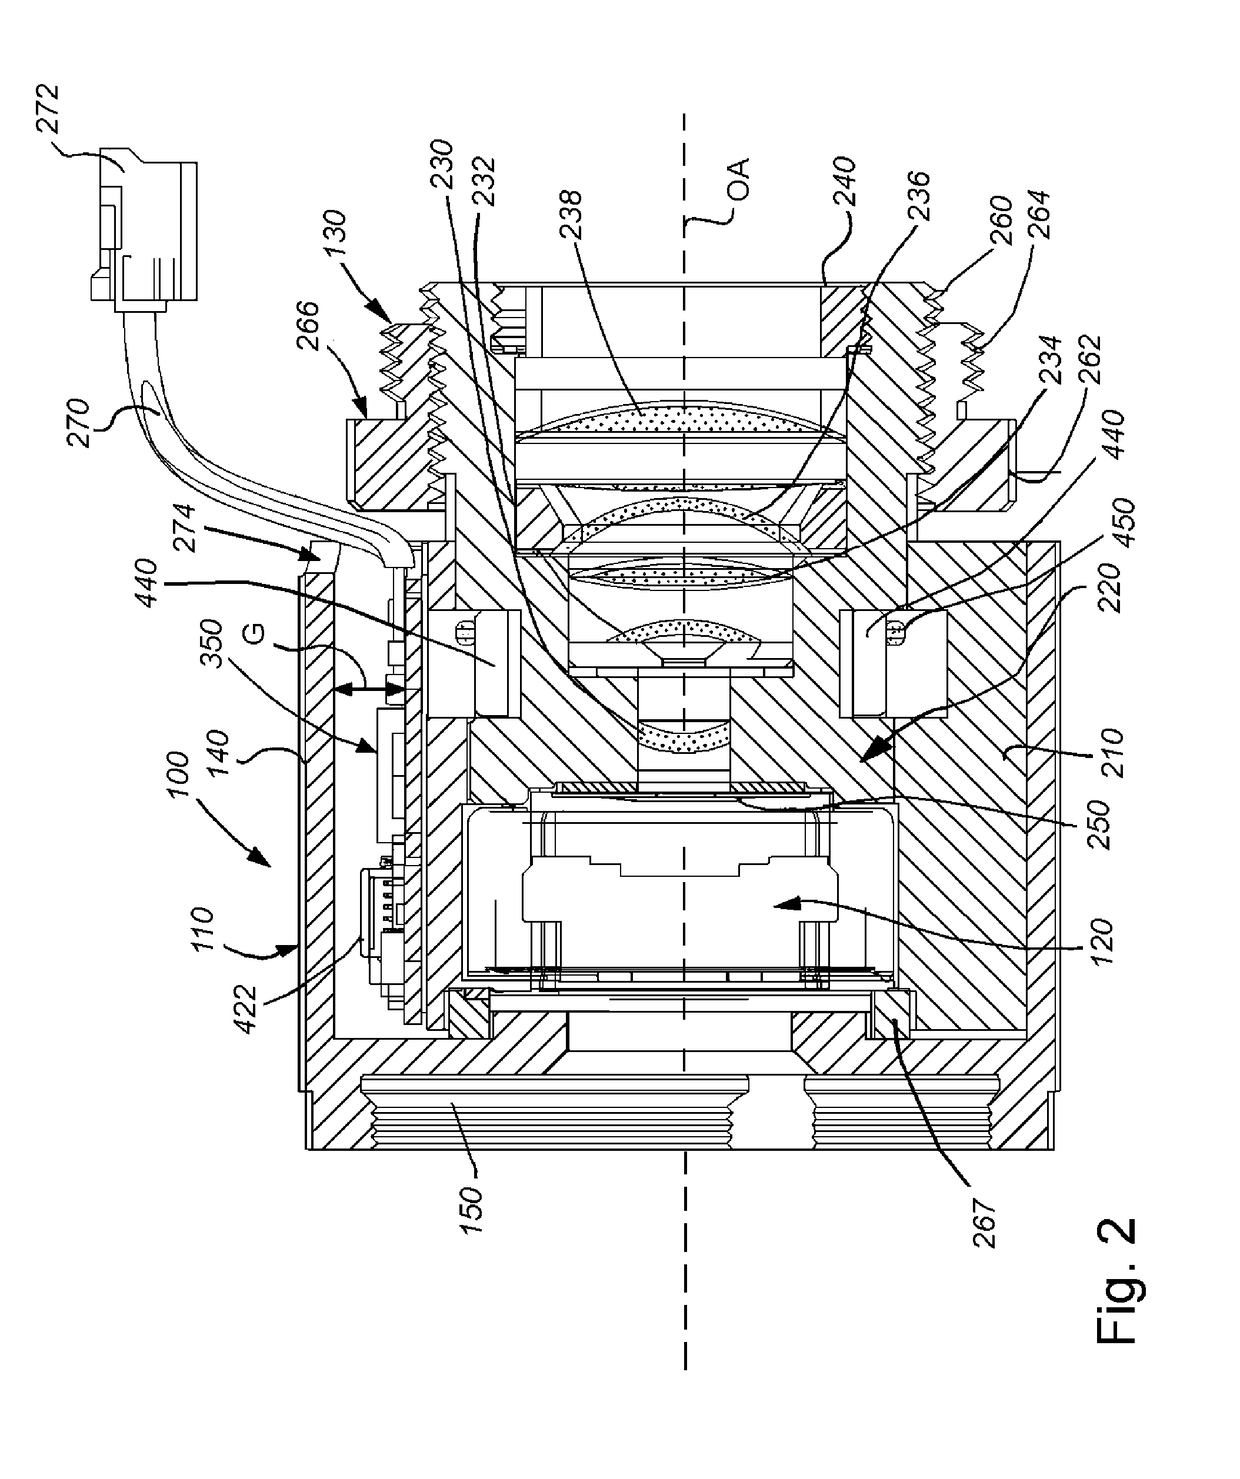 Lens assembly with integrated feedback loop and time-of-flight sensor